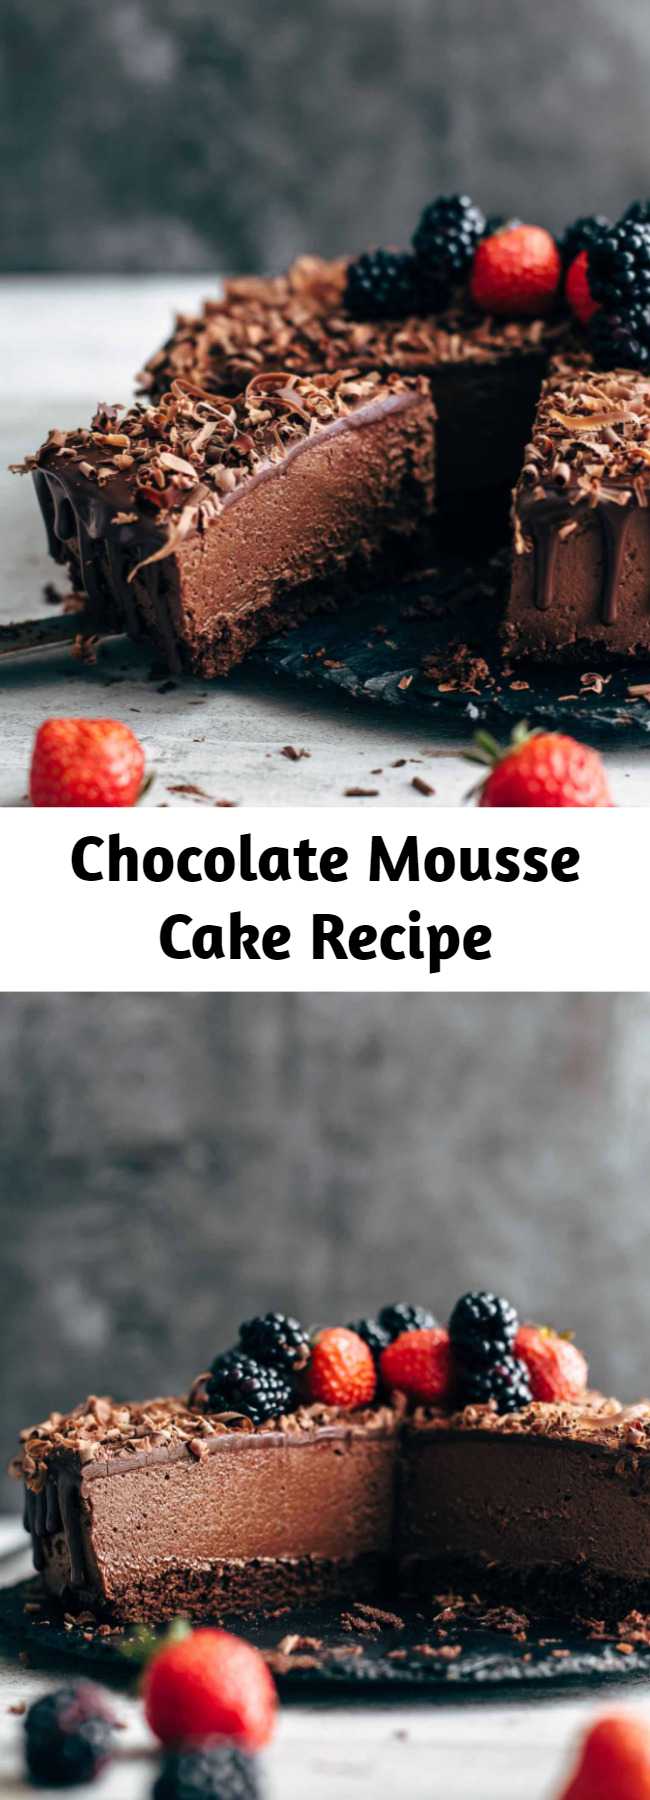 Chocolate Mousse Cake Recipe - This is THE Chocolate Mousse Cake recipe. Soft and moist chocolate cake layer topped with super creamy chocolate mousse and soft chocolate ganache.